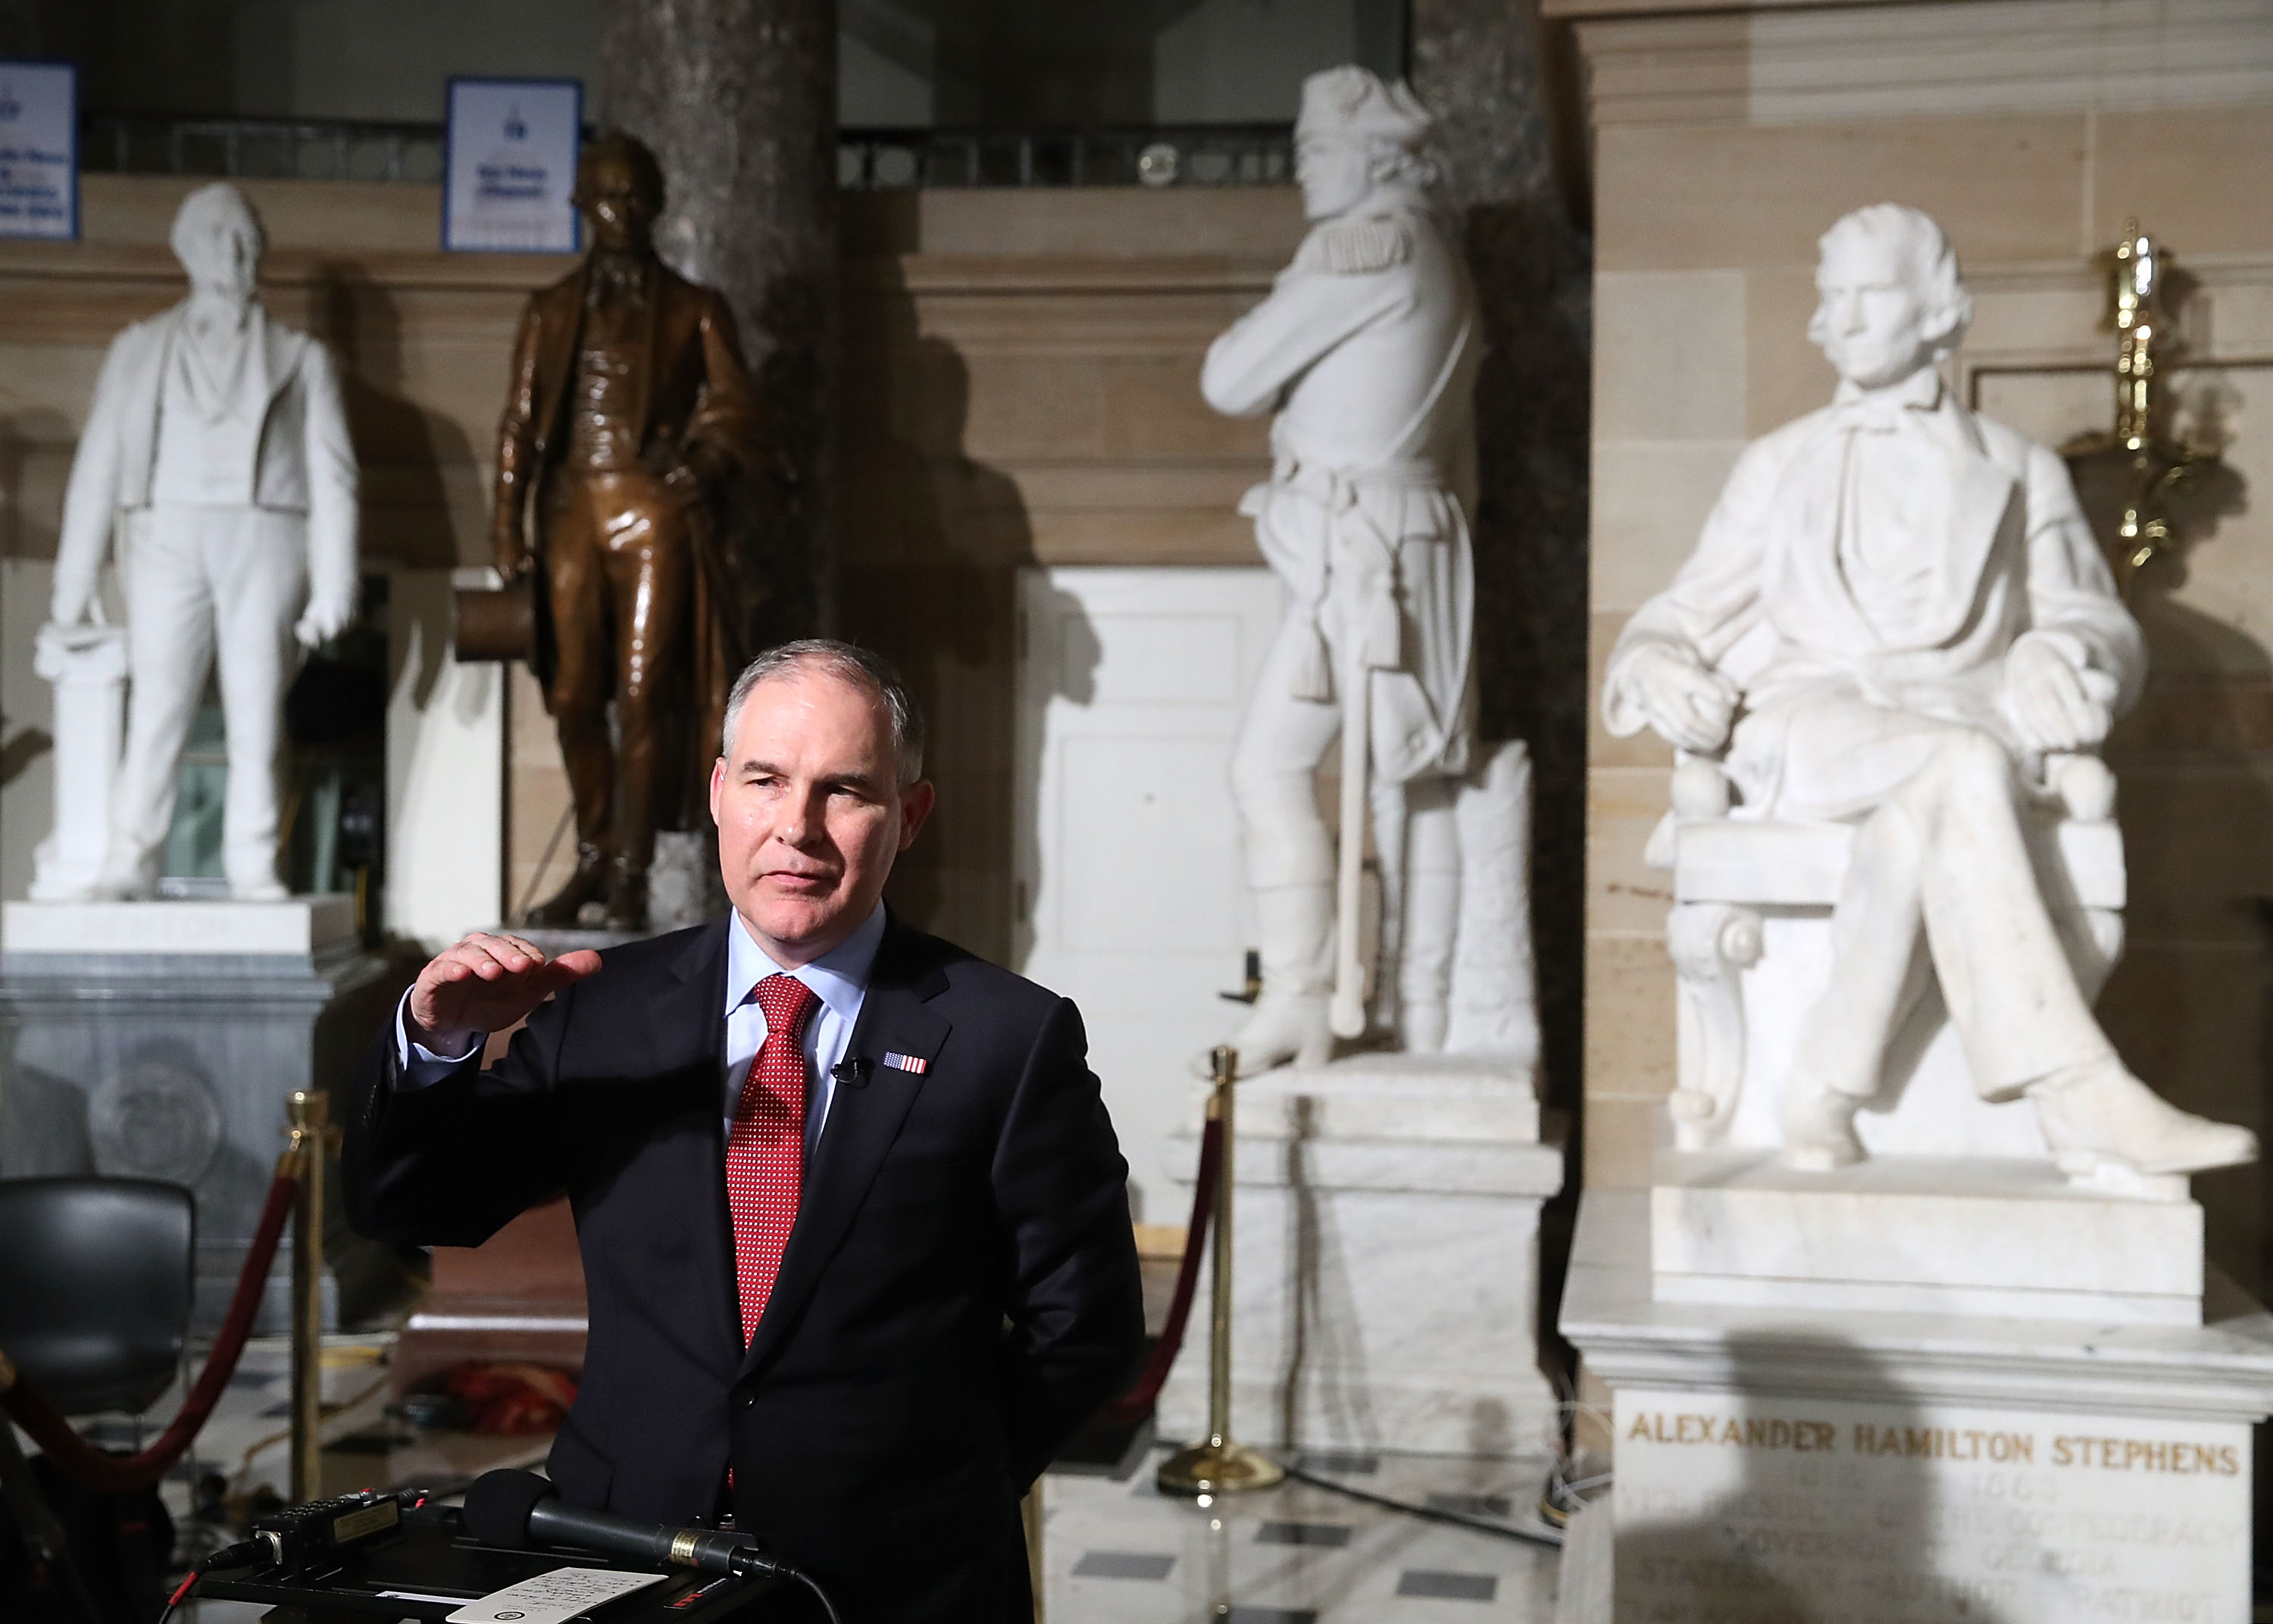 EPA Administrator Scott Pruitt does a television interview in Statuary Hall at the U.S. Capitol before President Donald Trump delivers a speech to a joint session of Congress on February 28, 2017 in Washington, D.C. (Mark Wilson&mdash;Getty Images)